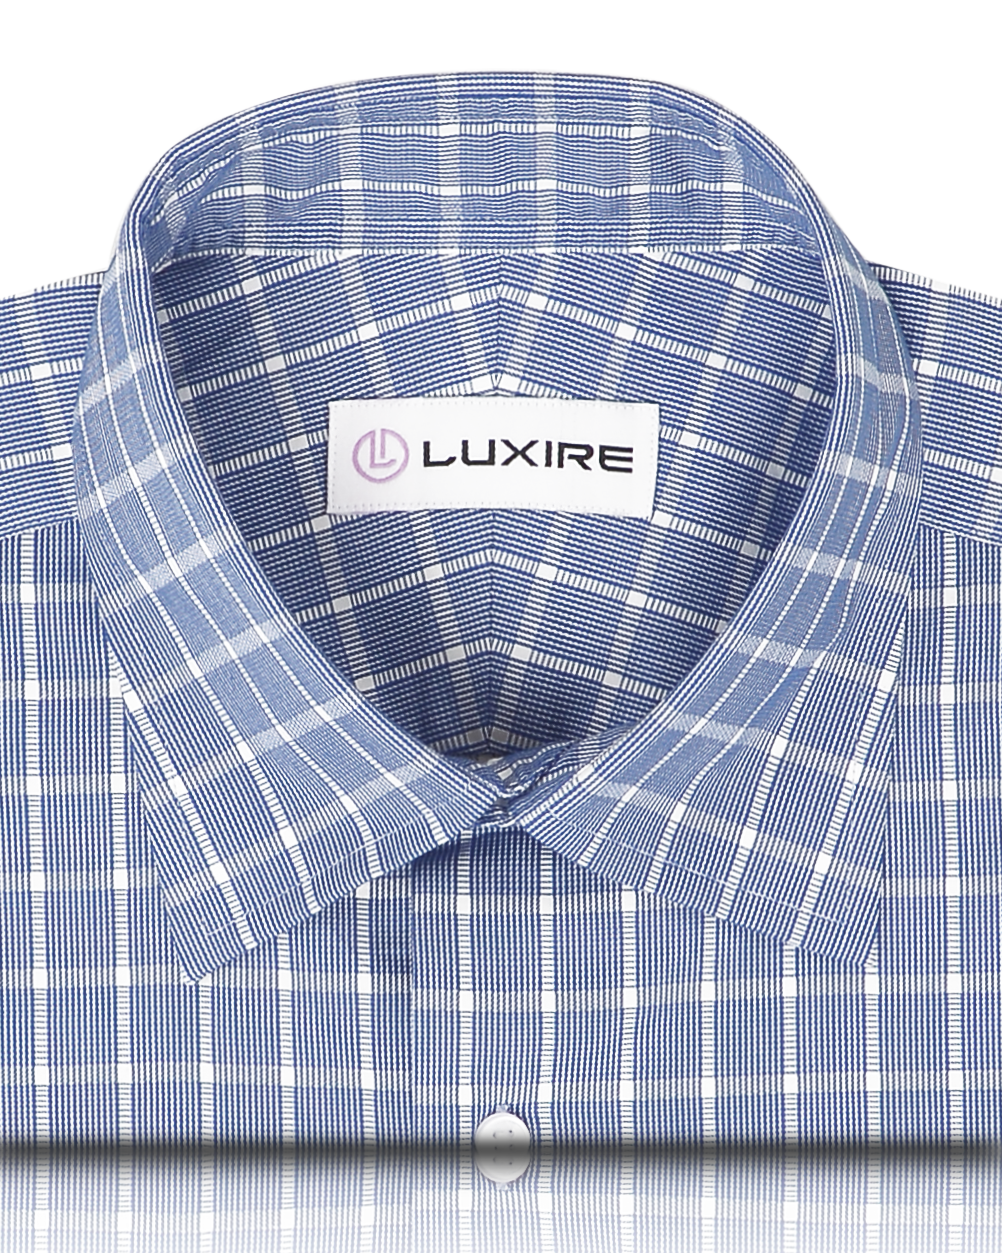 Front close up view of custom check shirts for men by Luxire in navy blue white grid